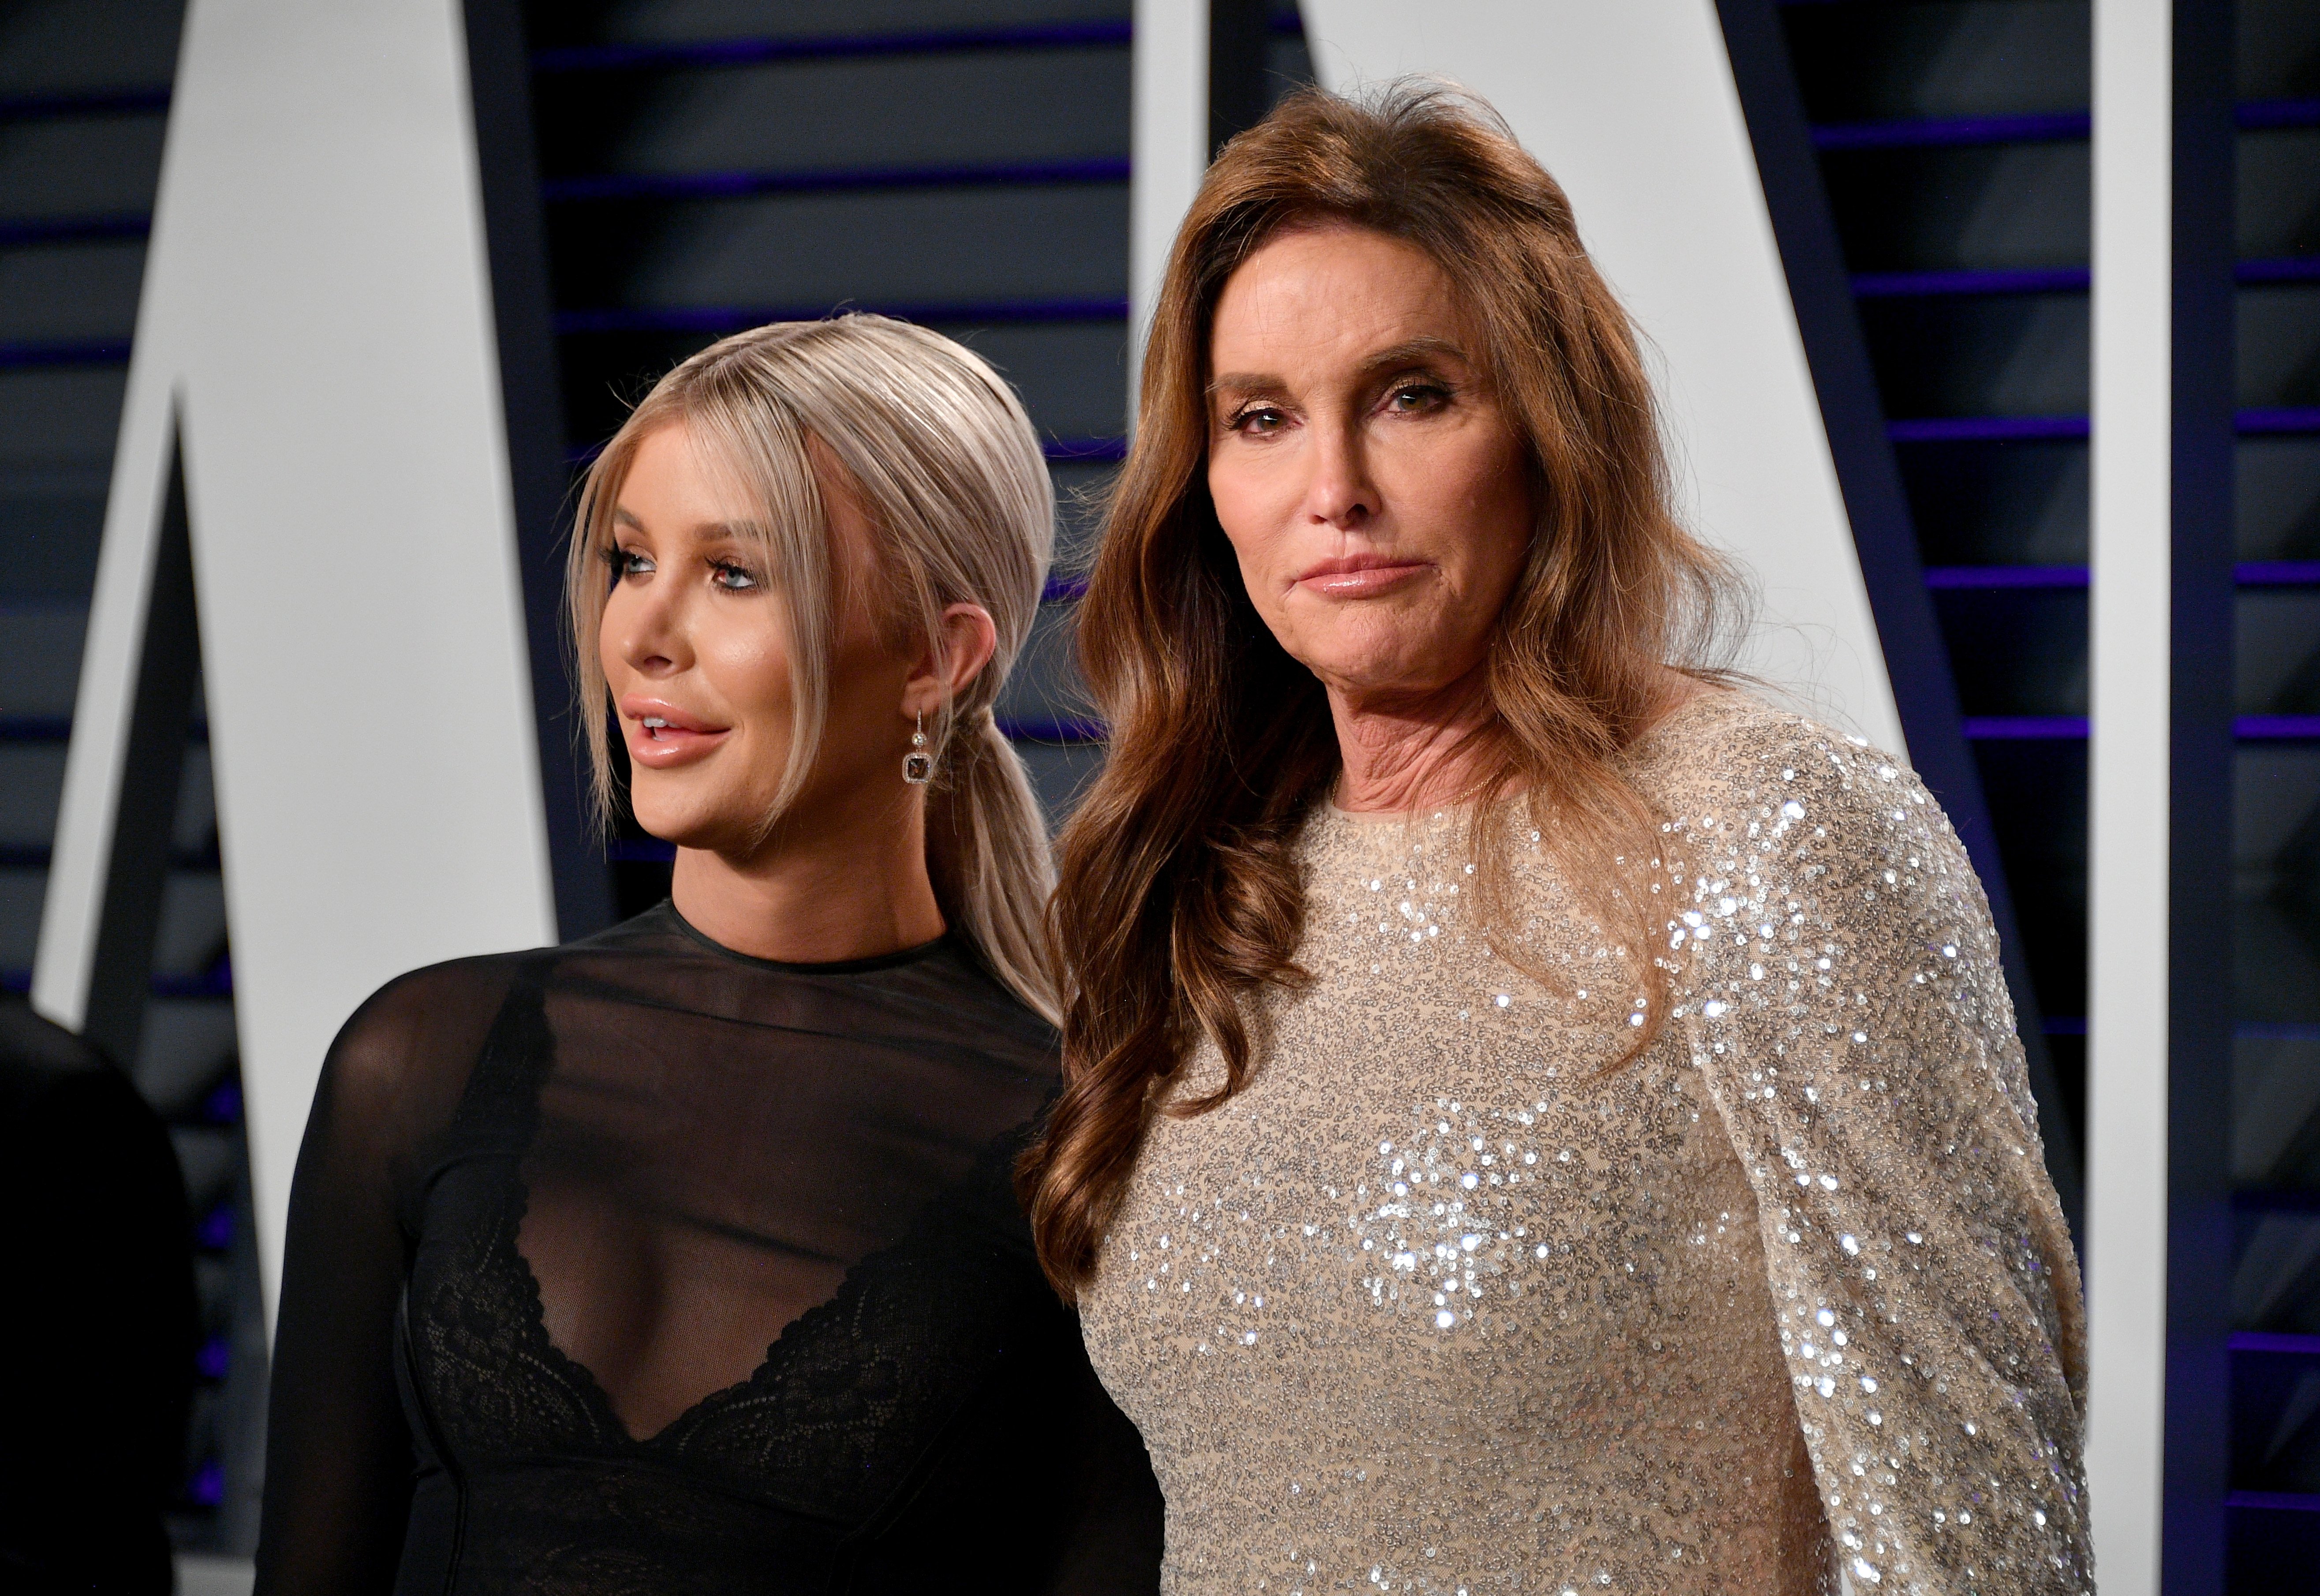 Caitlyn Jenner and Sophia Hutchins attends the 2019 Vanity Fair Oscar Party | Photo: Getty Images